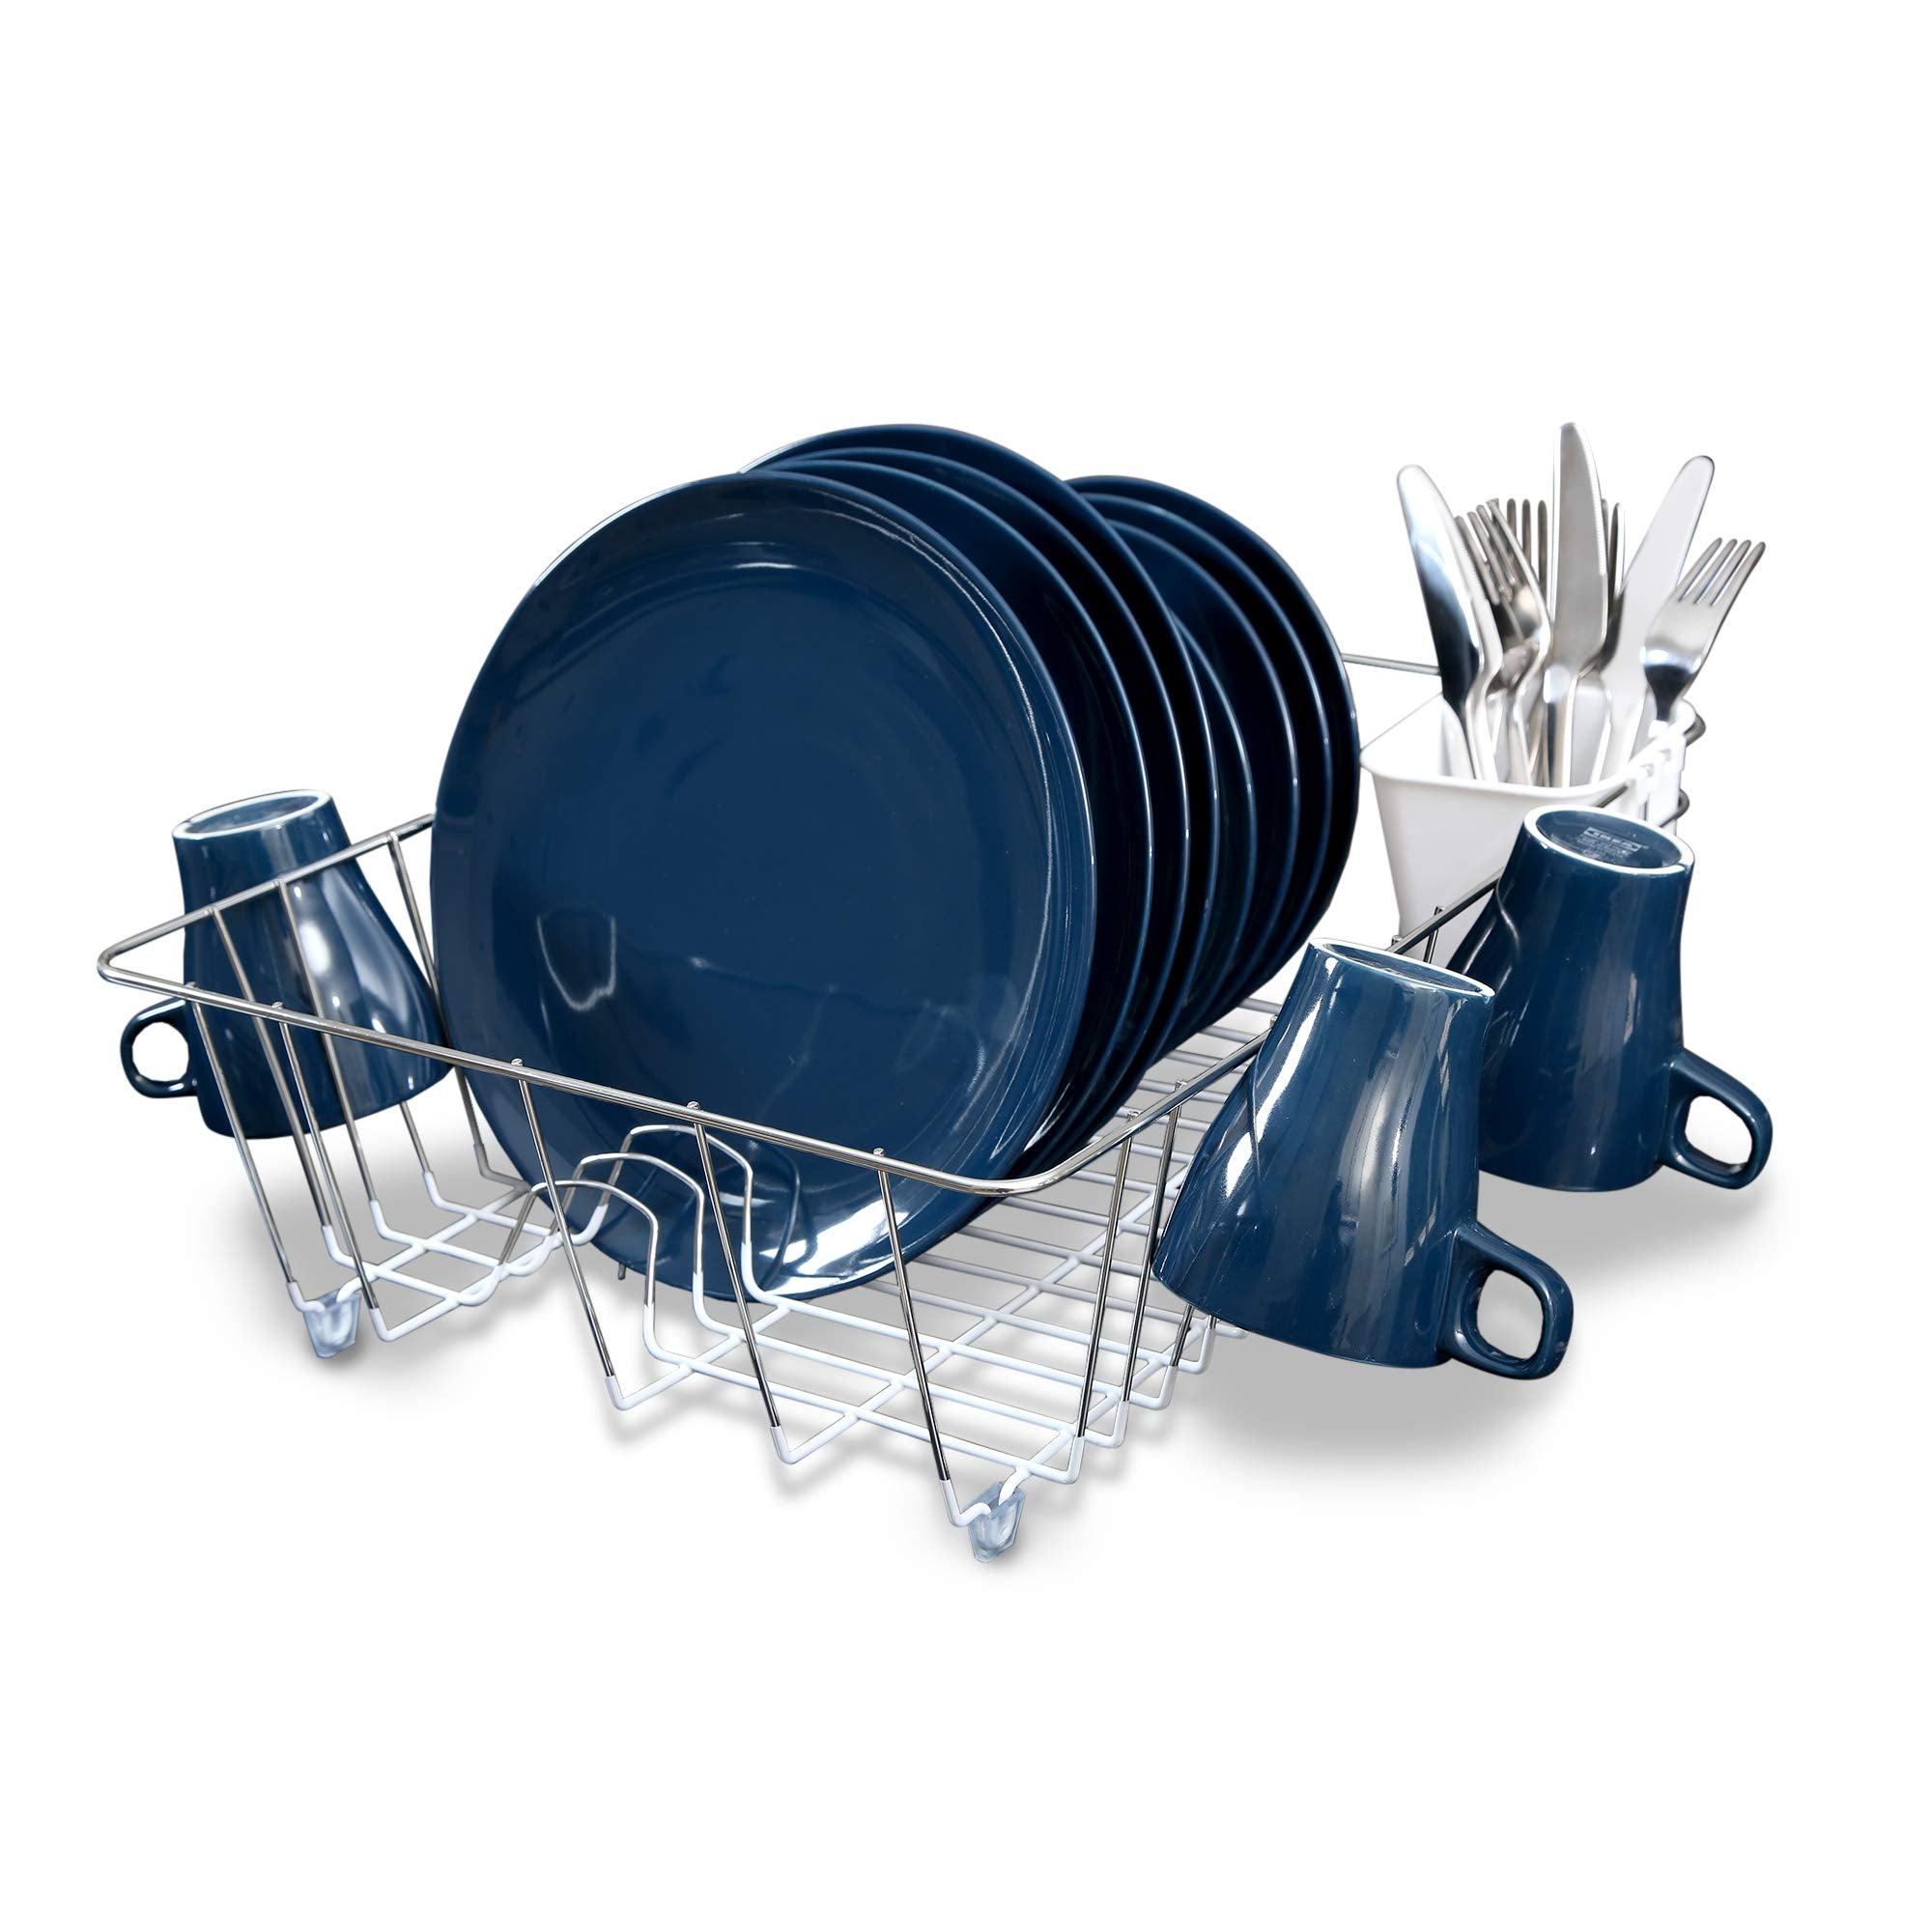 Dish Drainer Rack for In Sink or Counter Drying - Large - Smart Design® 4